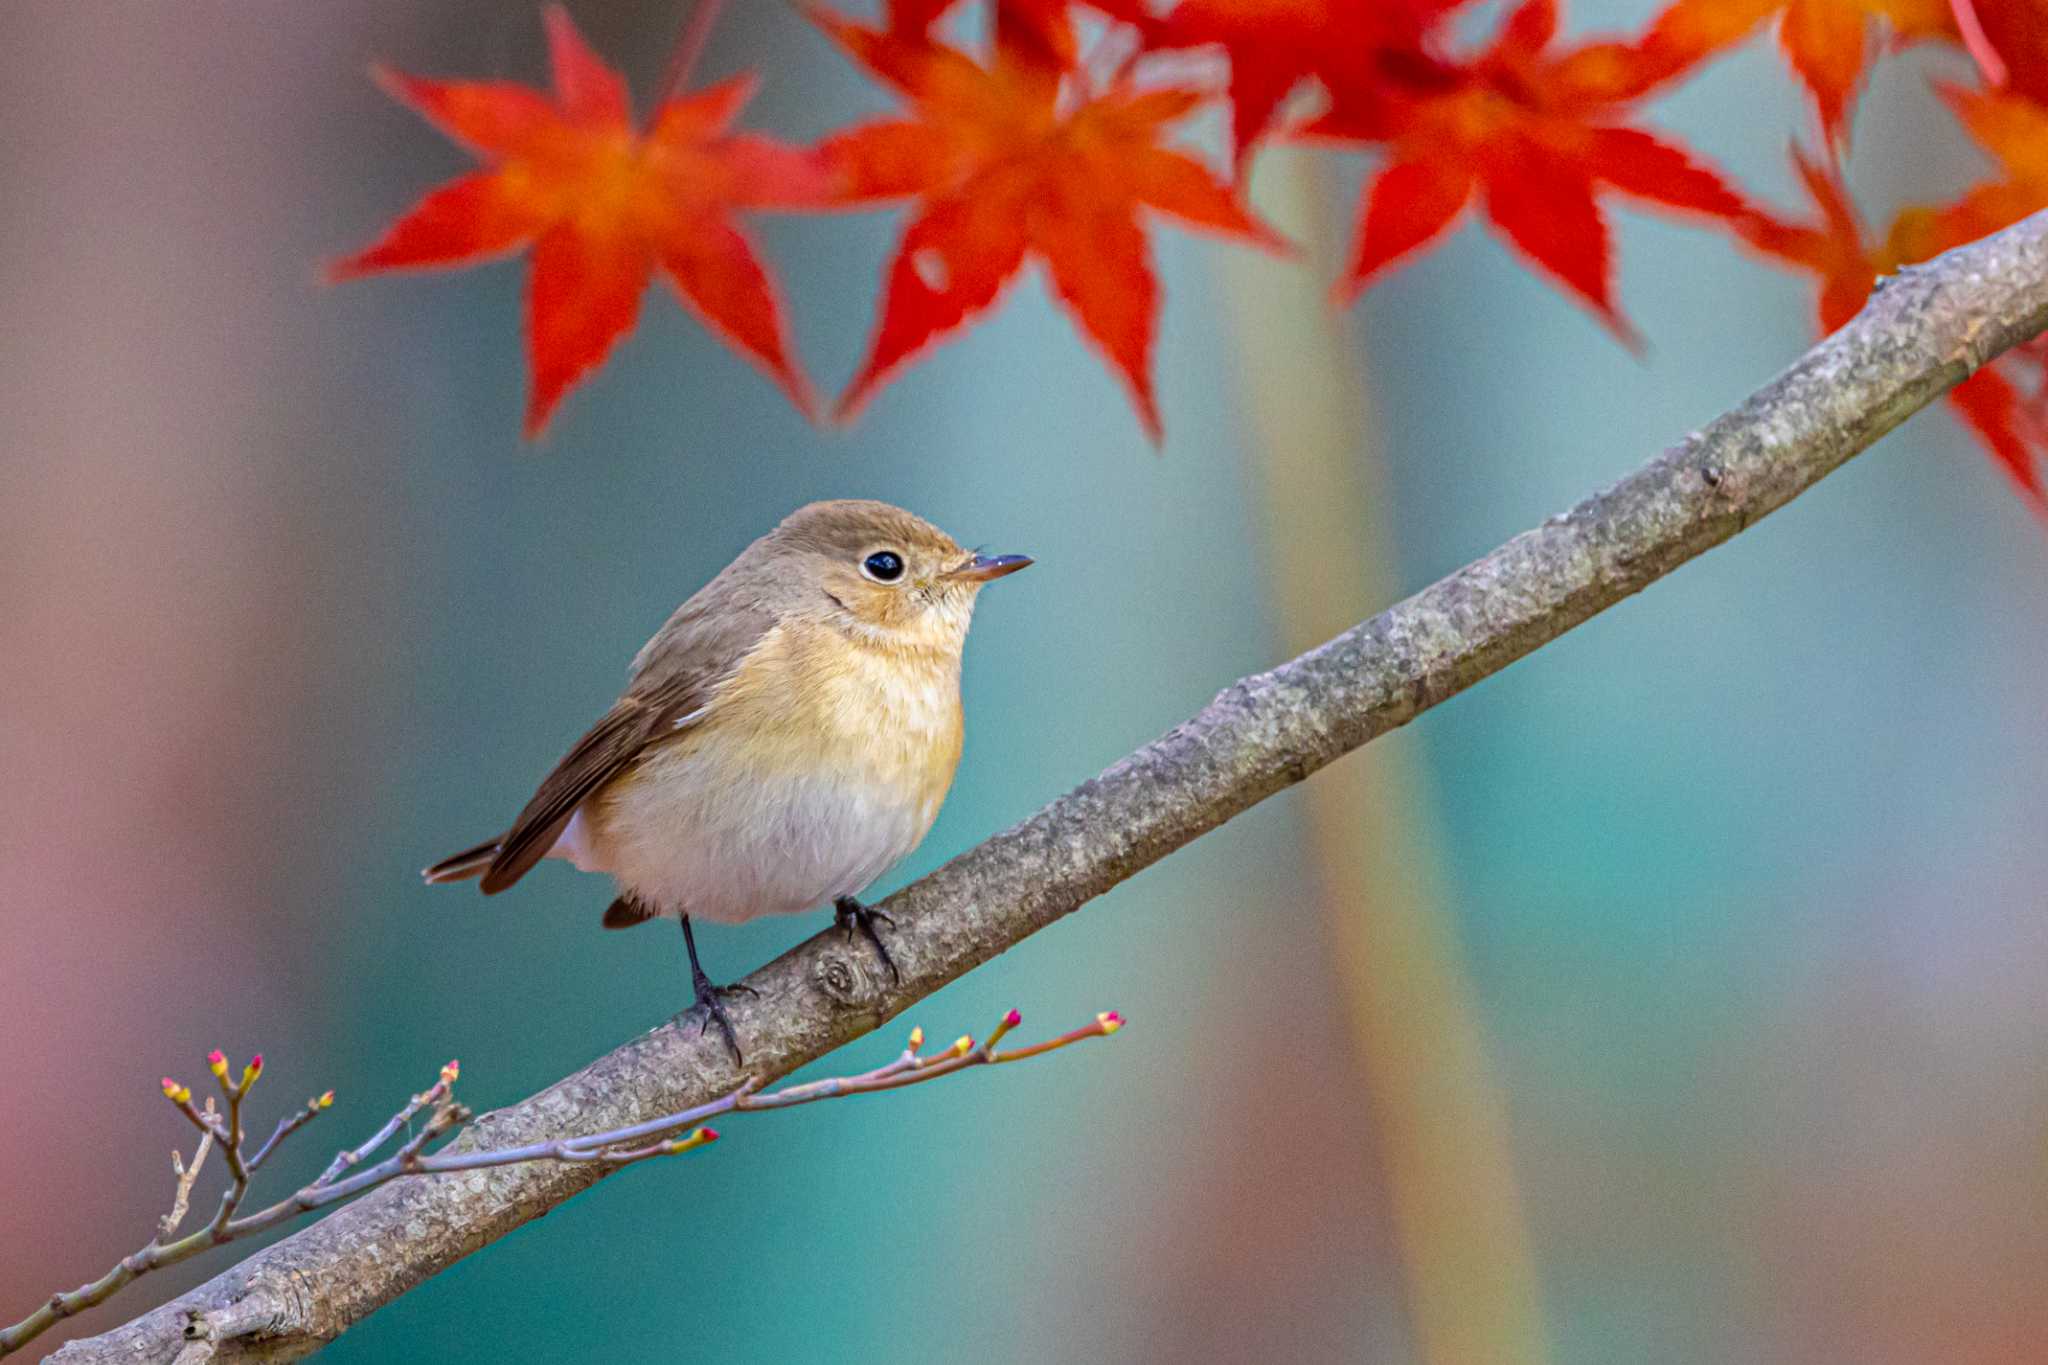 Photo of Taiga Flycatcher at 明石市魚住町 by ときのたまお